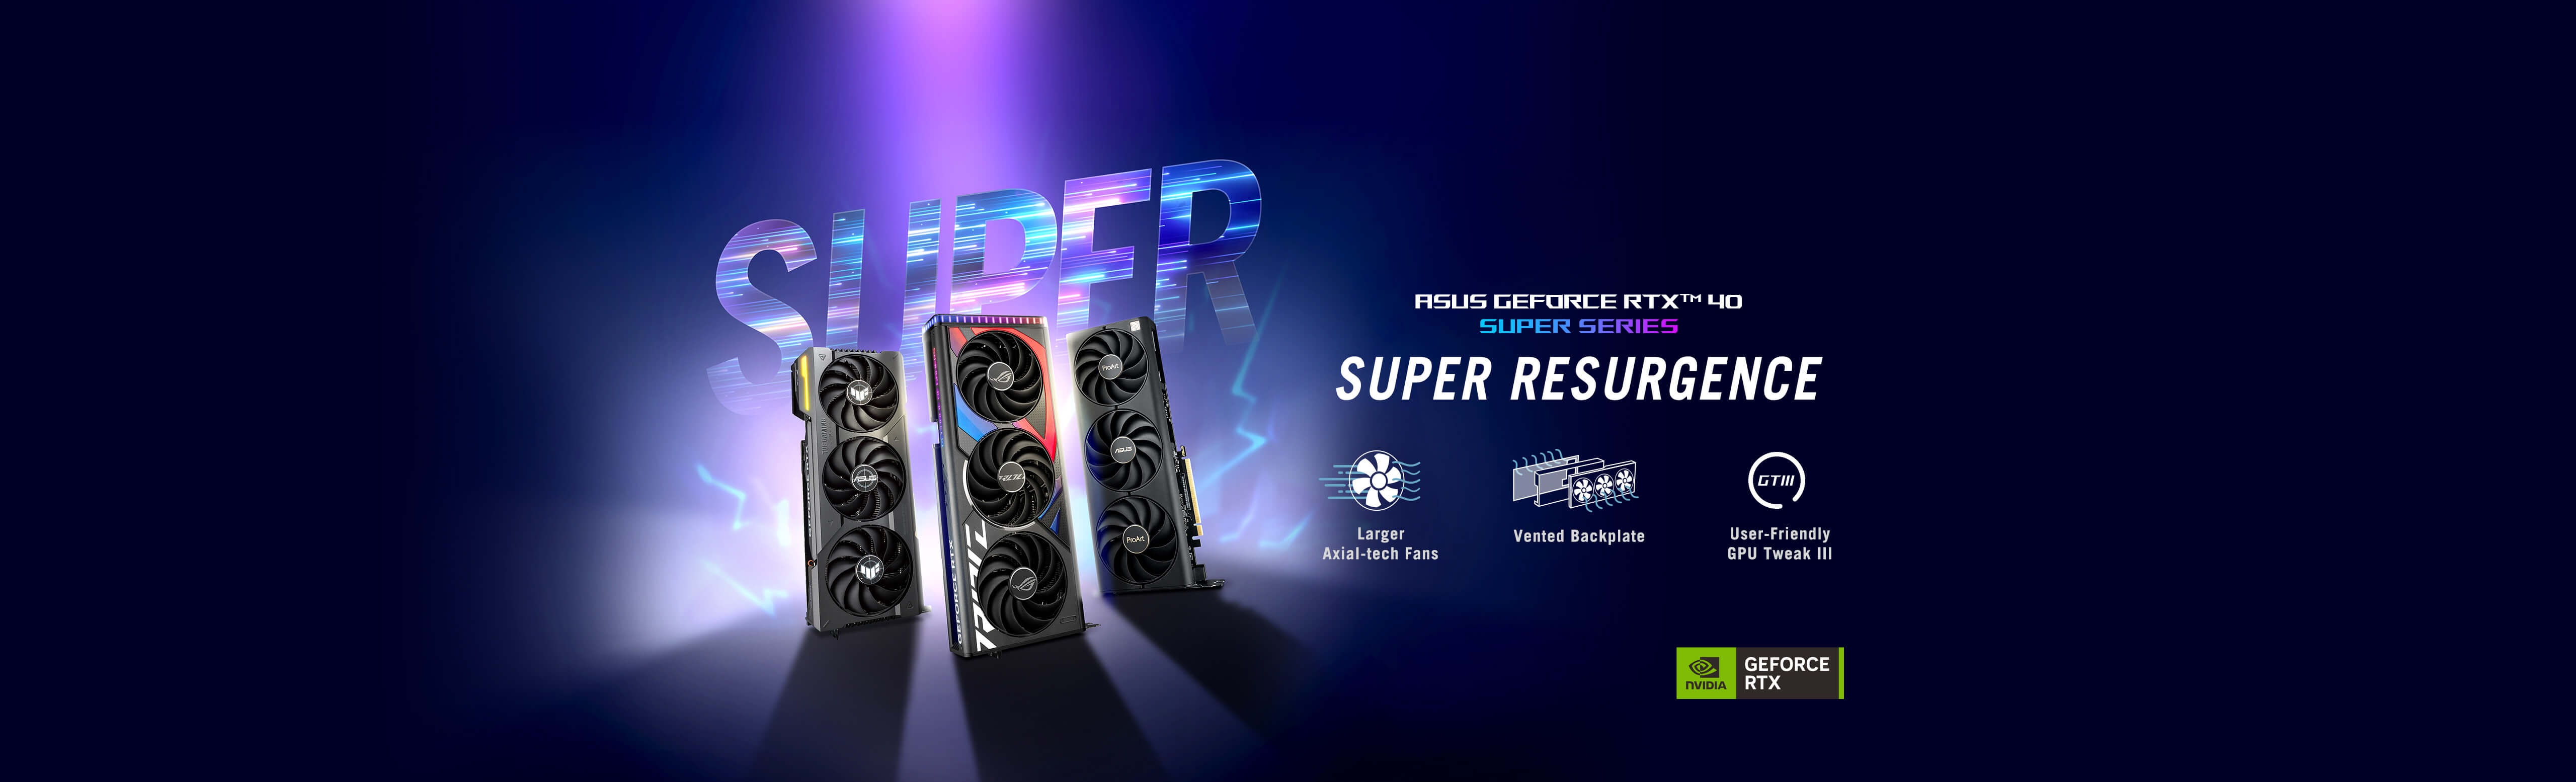 ASUS GeForce RTX™ 40 SUPER SERIES - SUPER RESURGENCE, featuring Larger Axial-tech Fans, Vented backplate, and User-Friendly GPU Tweak III